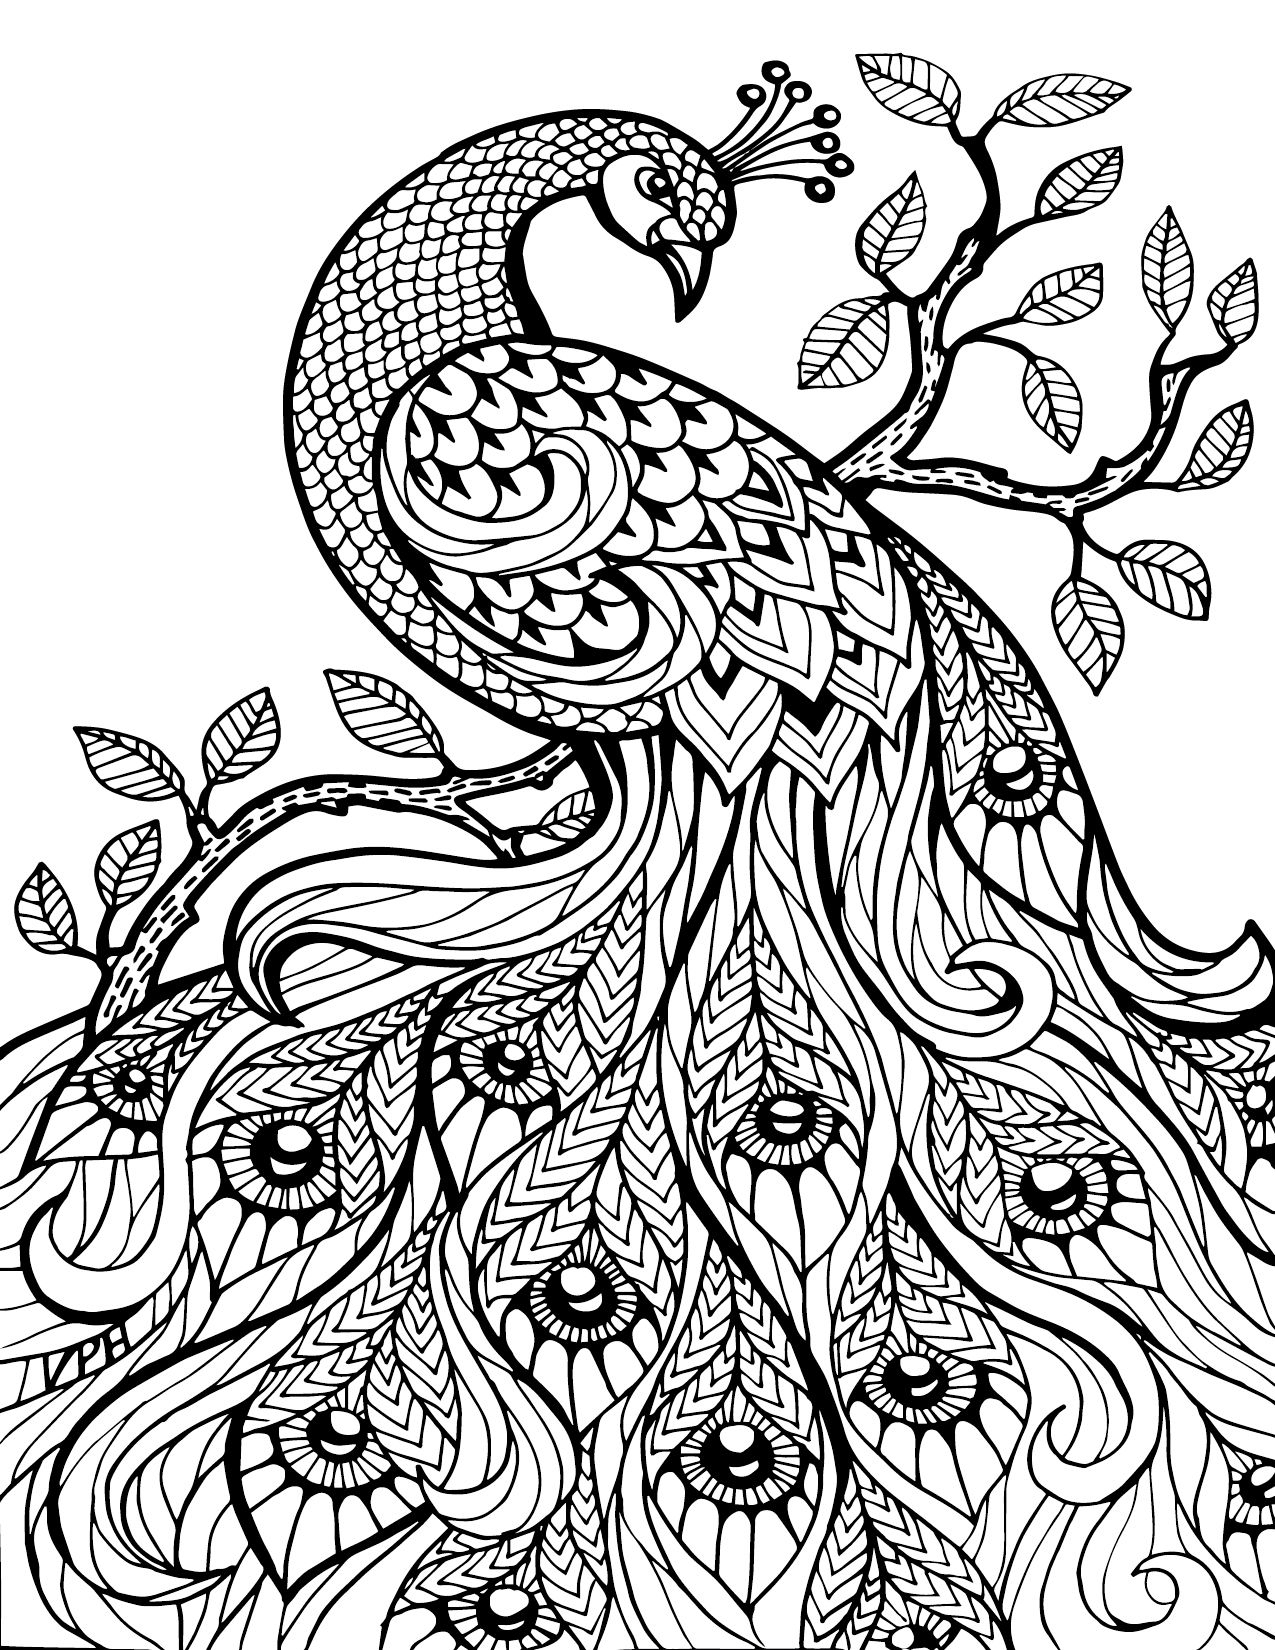 Free Printable Coloring Pages For Adults Only Image 36 Art - Free Printable Coloring Designs For Adults